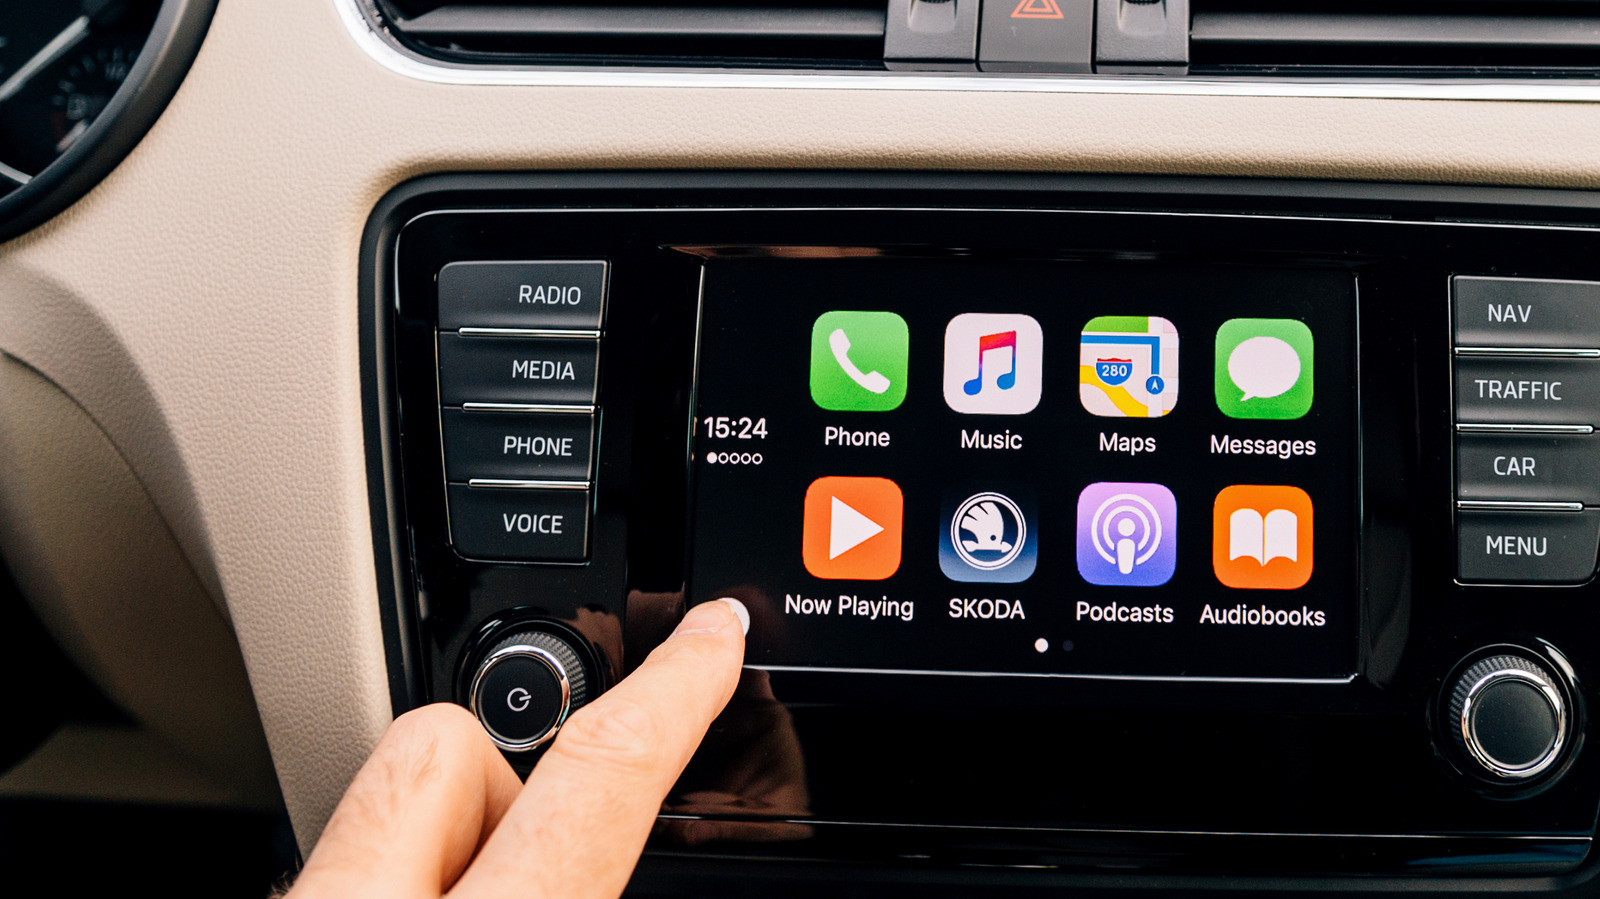 Even Apple CarPlay Faces Allegations of Anticompetitive Practices in US Lawsuit